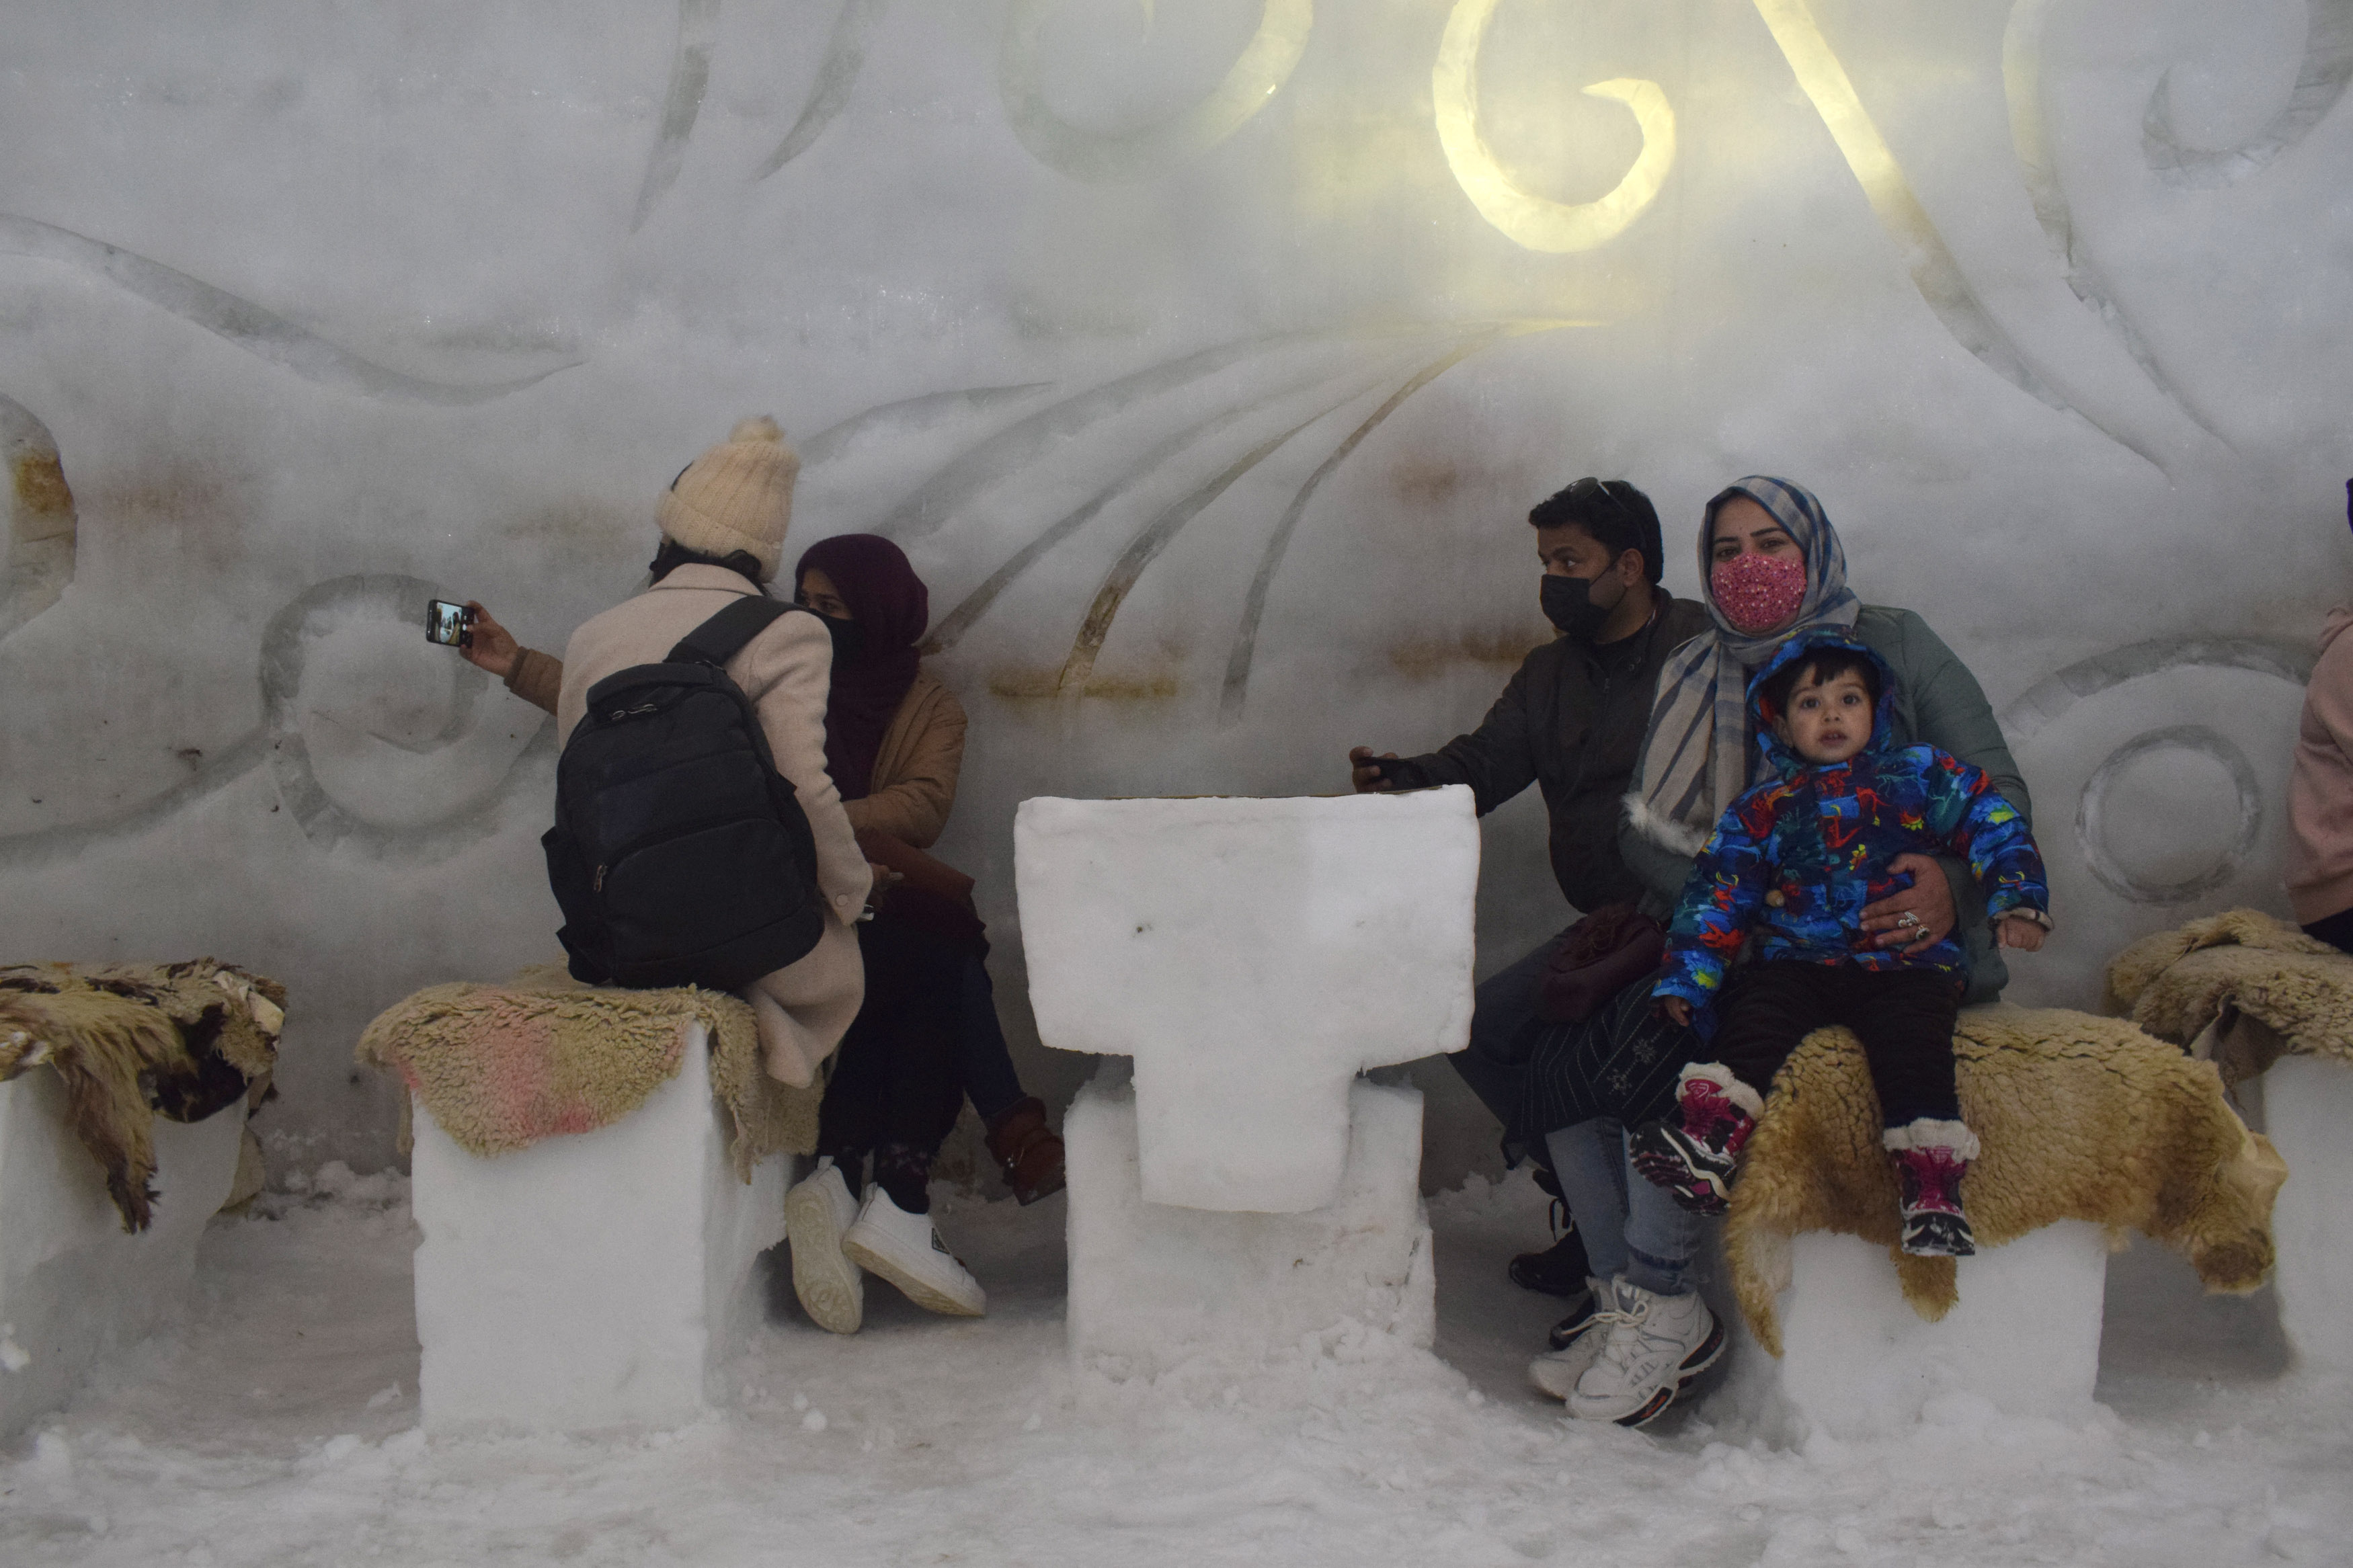 The management claims that this is the biggest igloo cafe in the world and they have applied for the Guinness World Record